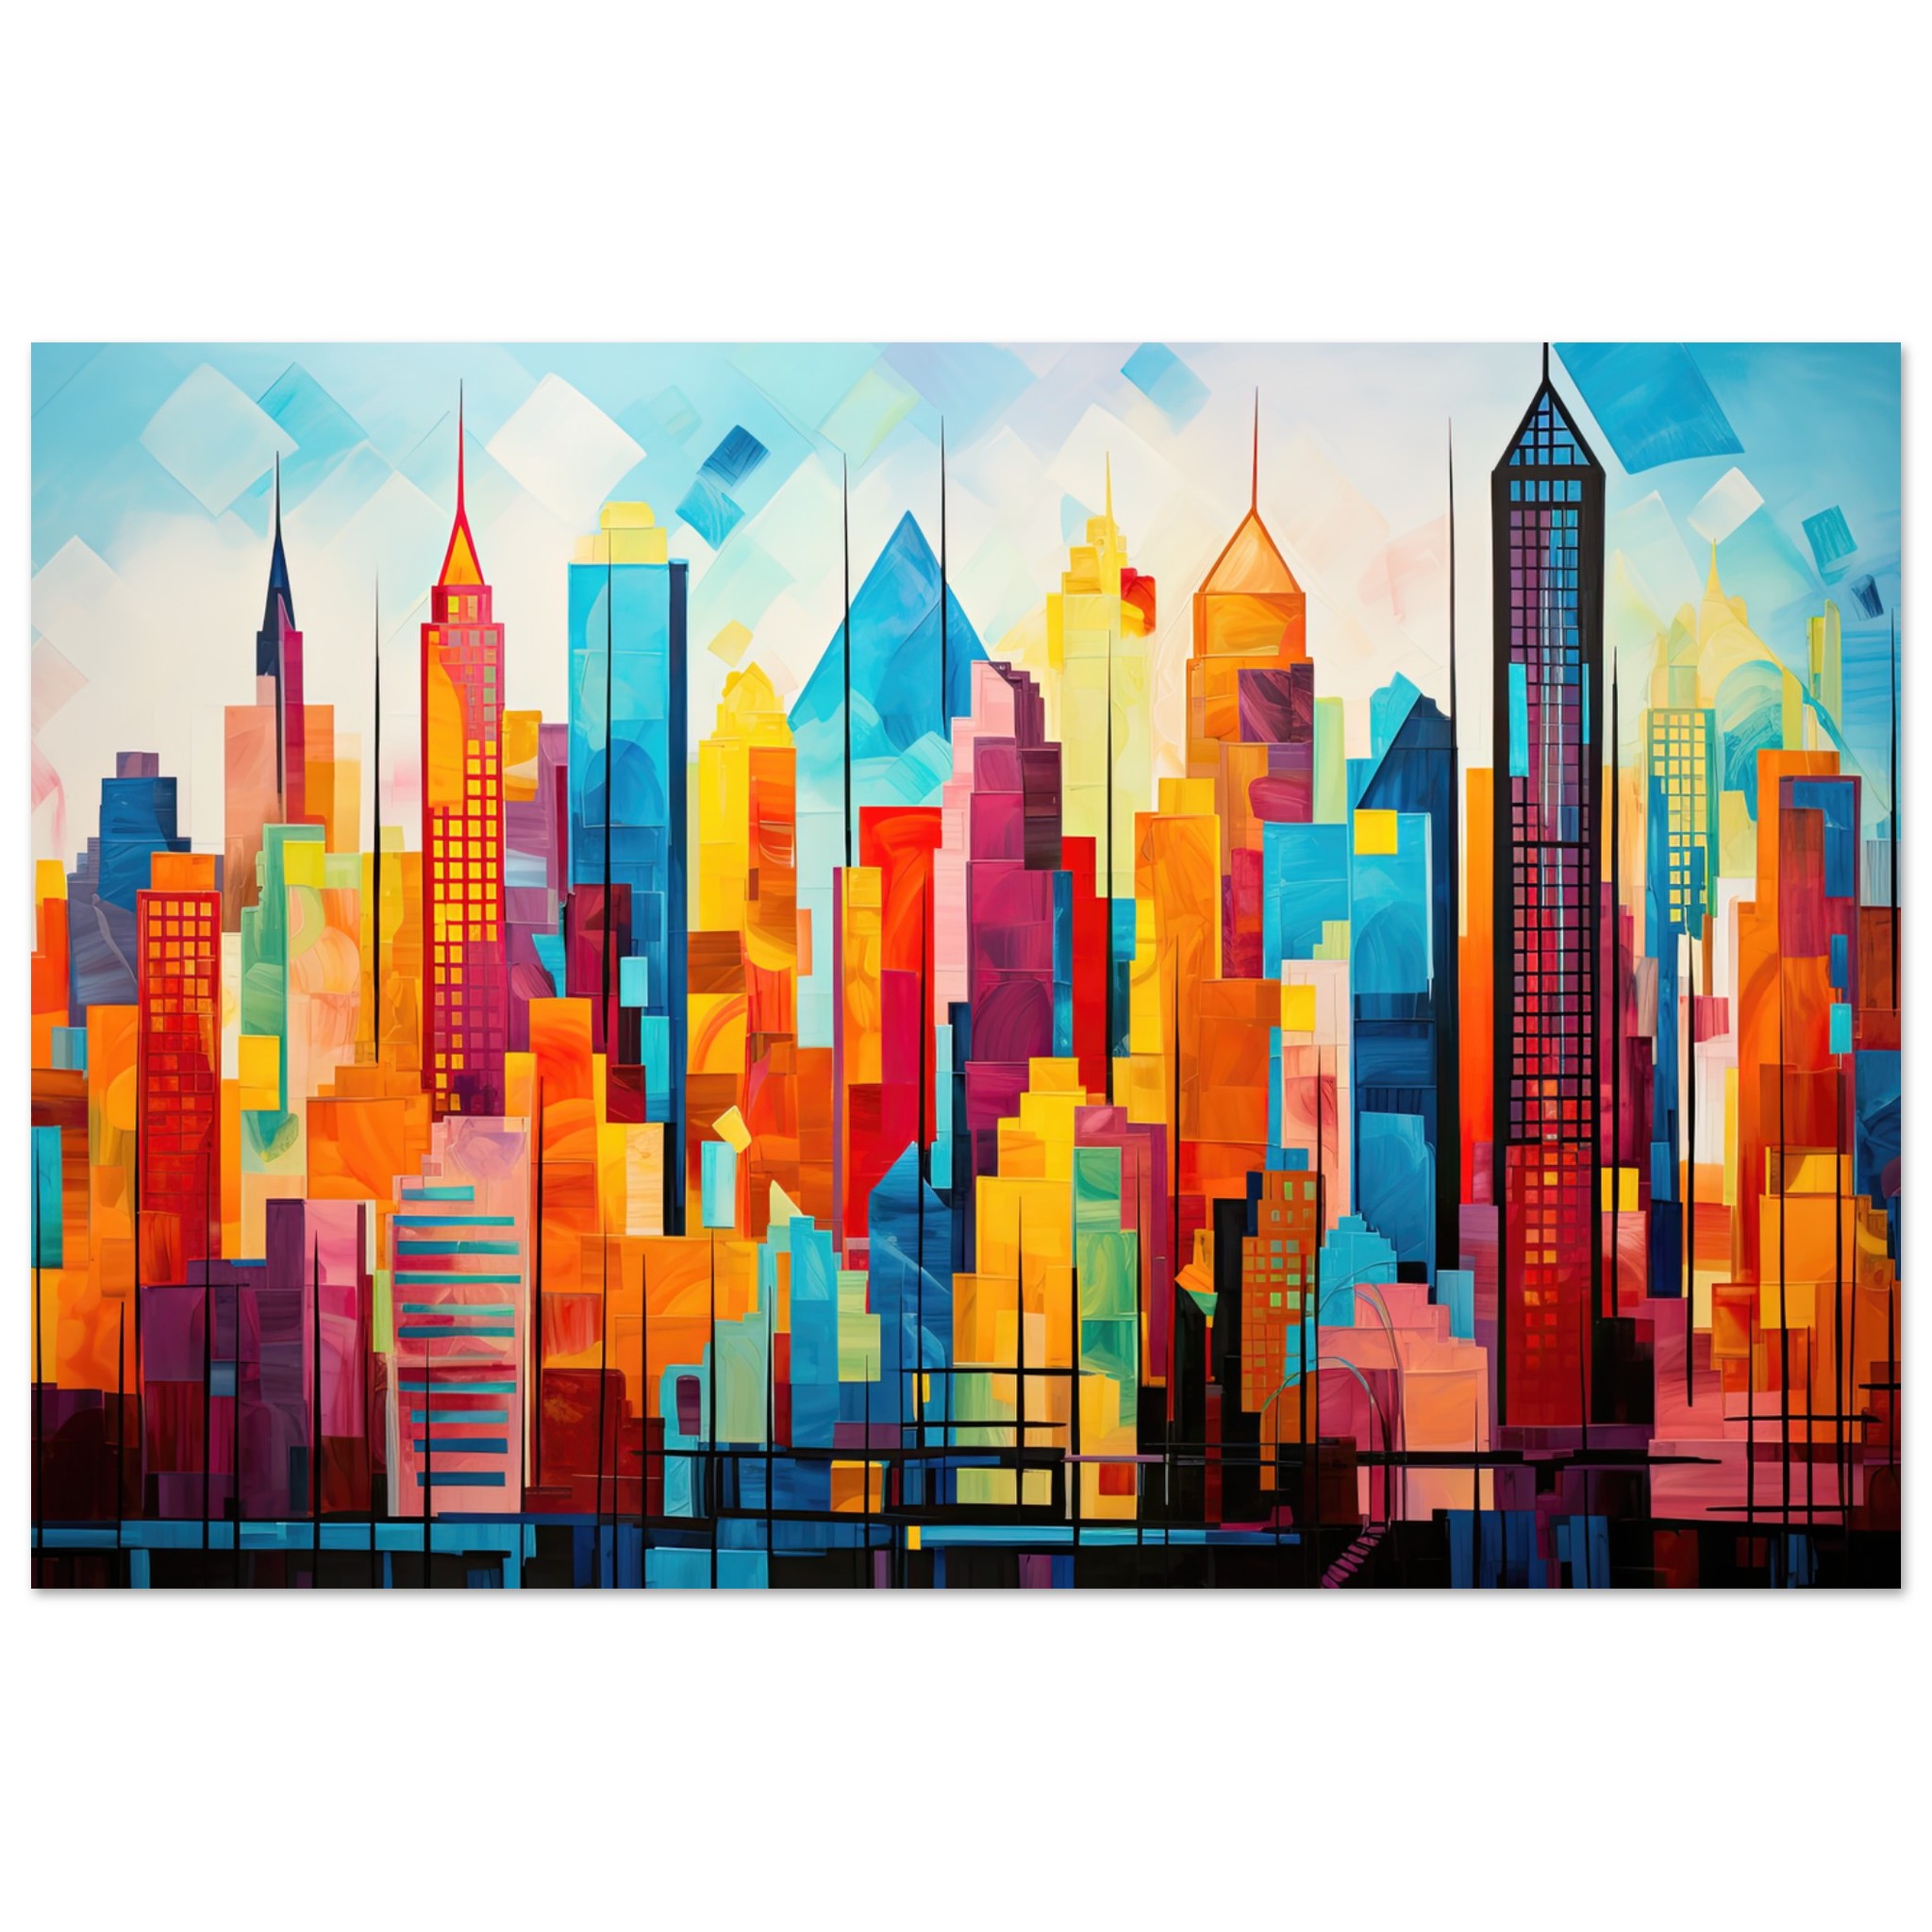 Colorful Abstract Cityscape Painted – Poster – 40×60 cm / 16×24″